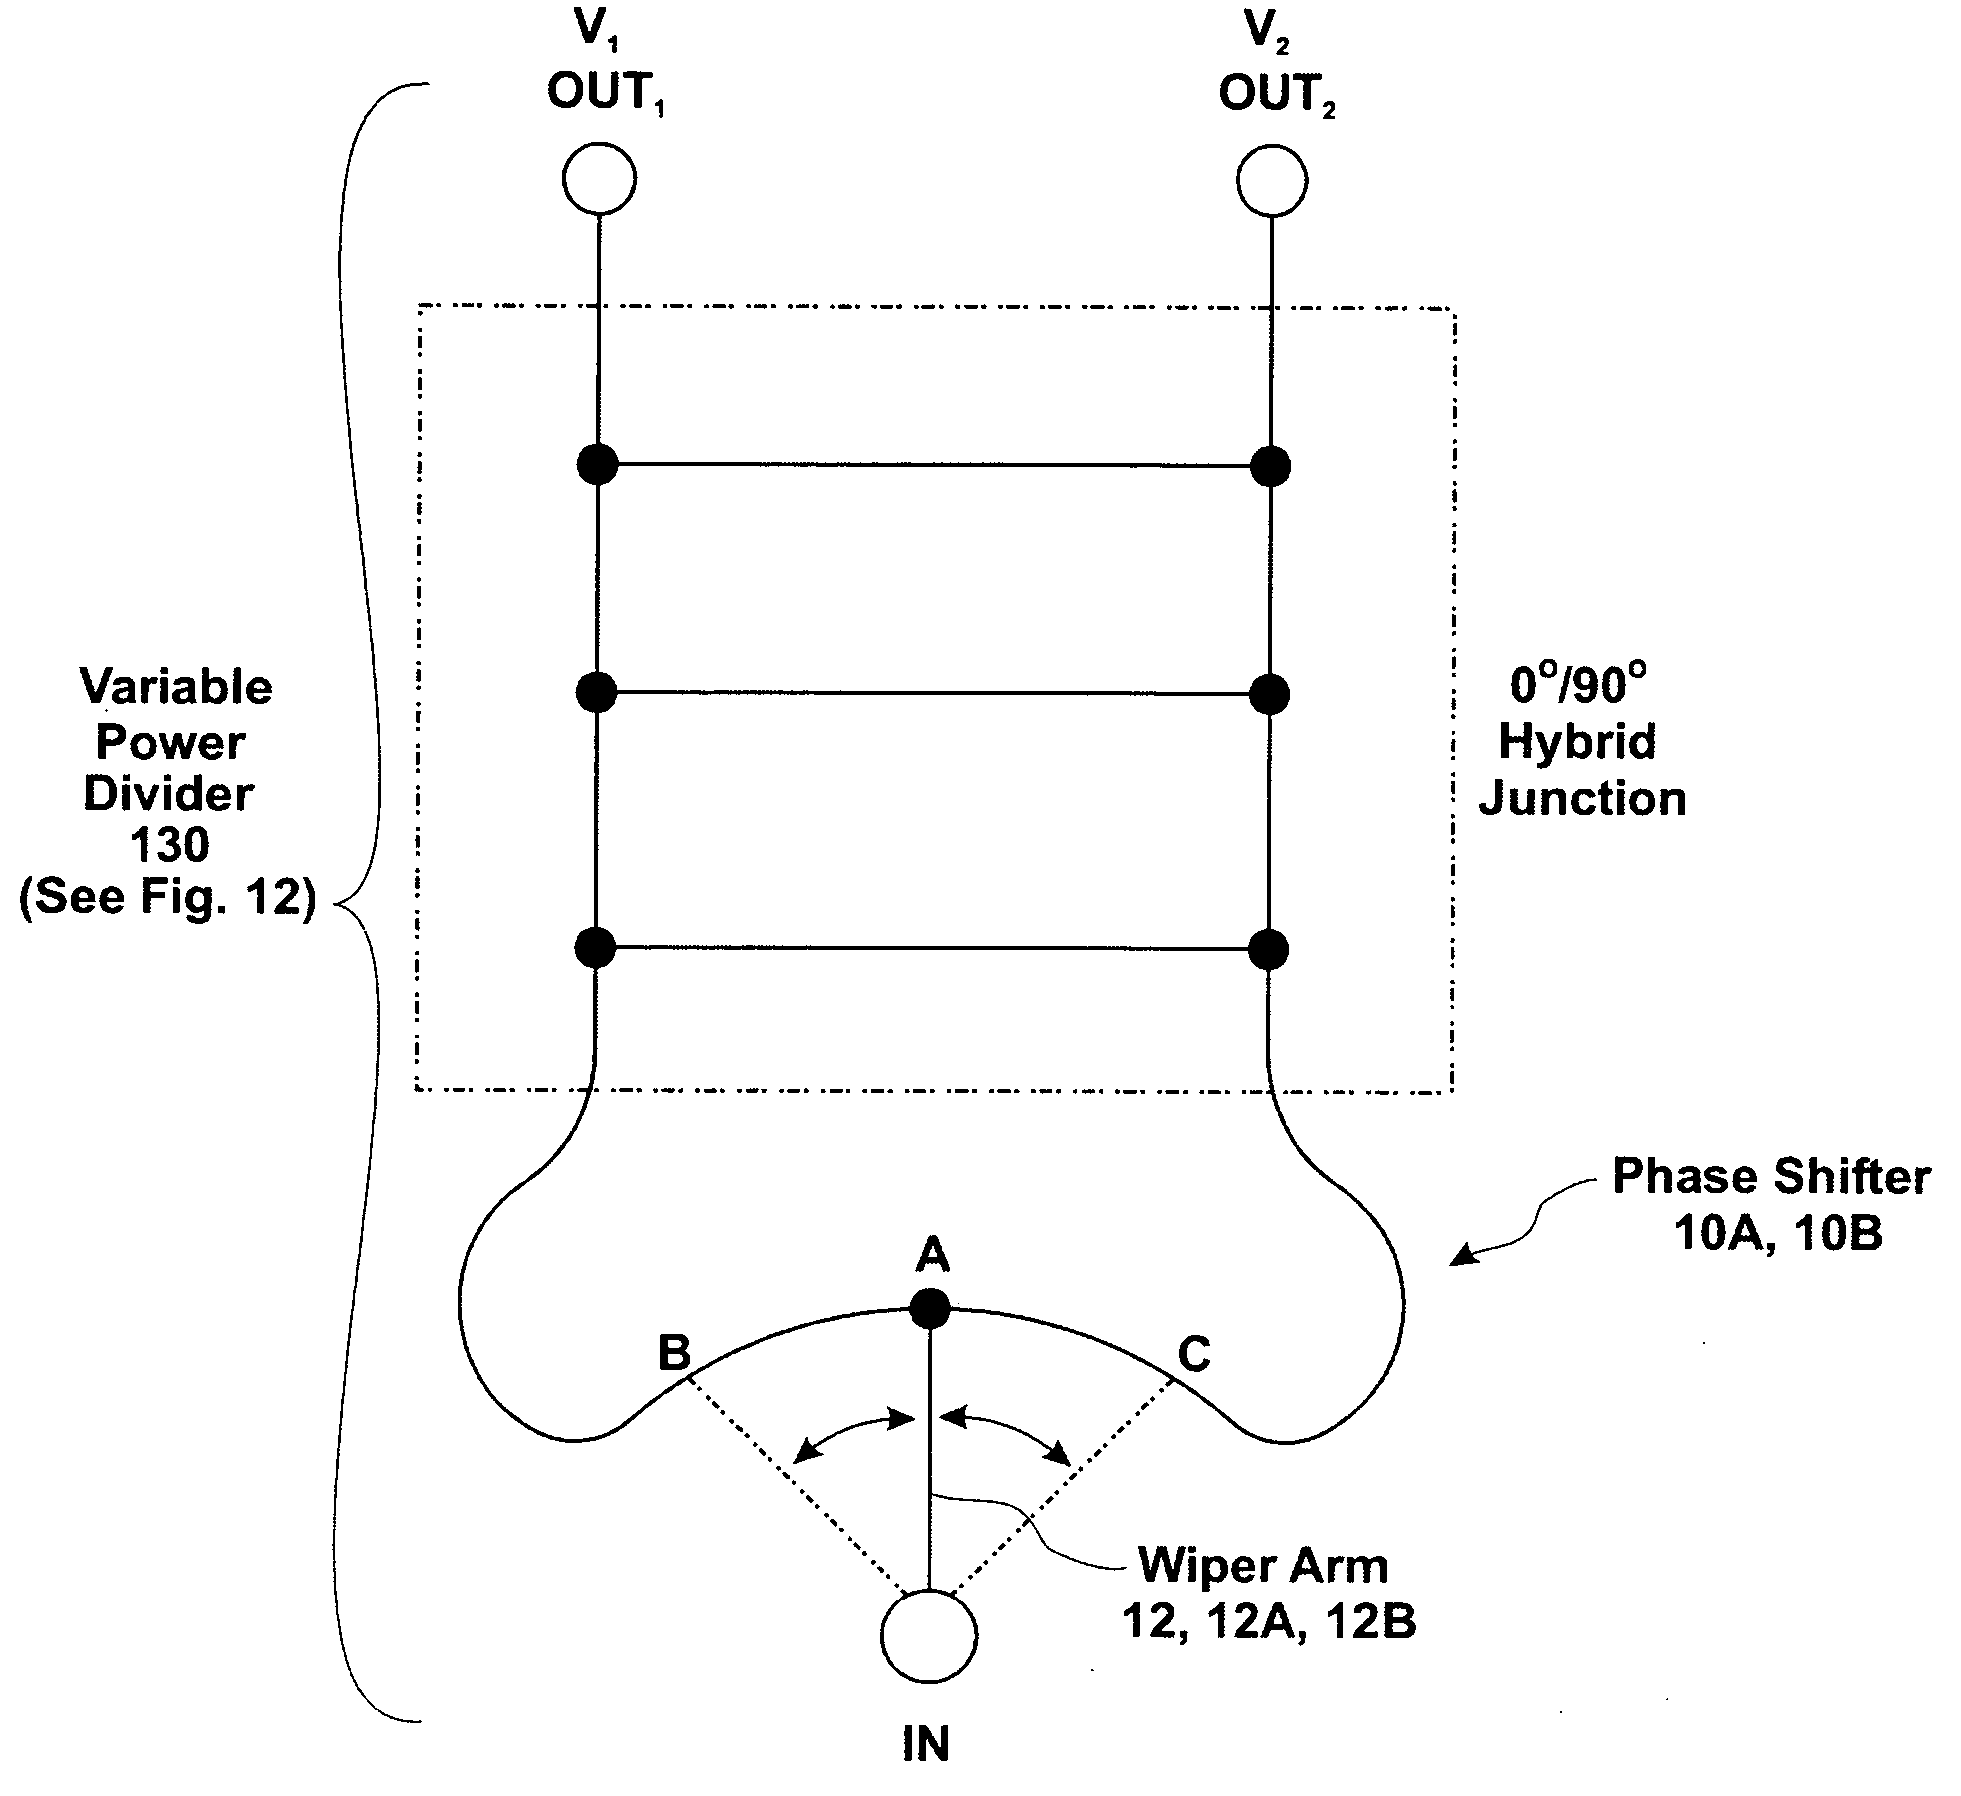 Wiper-type phase shifter with cantilever shoe and dual-polarization antenna with commonly driven phase shifters